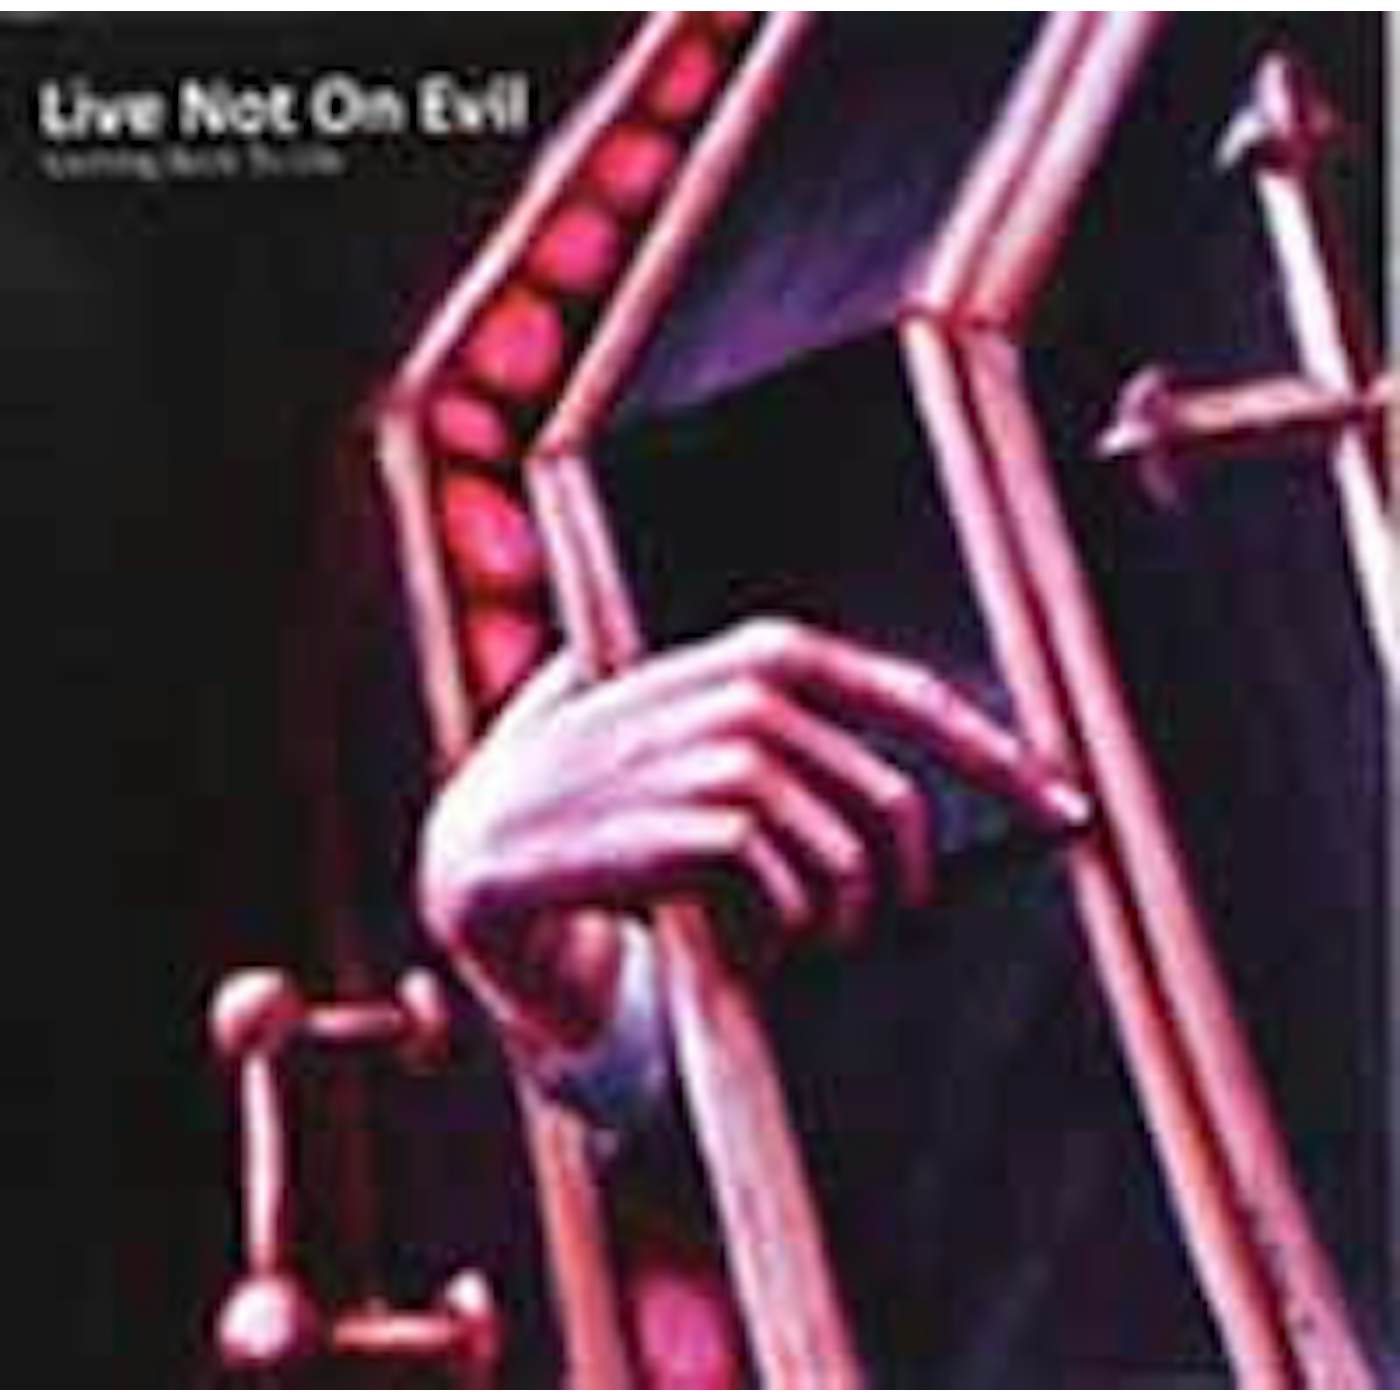 Live Not On Evil LP - Coming Back To Life (Vinyl)